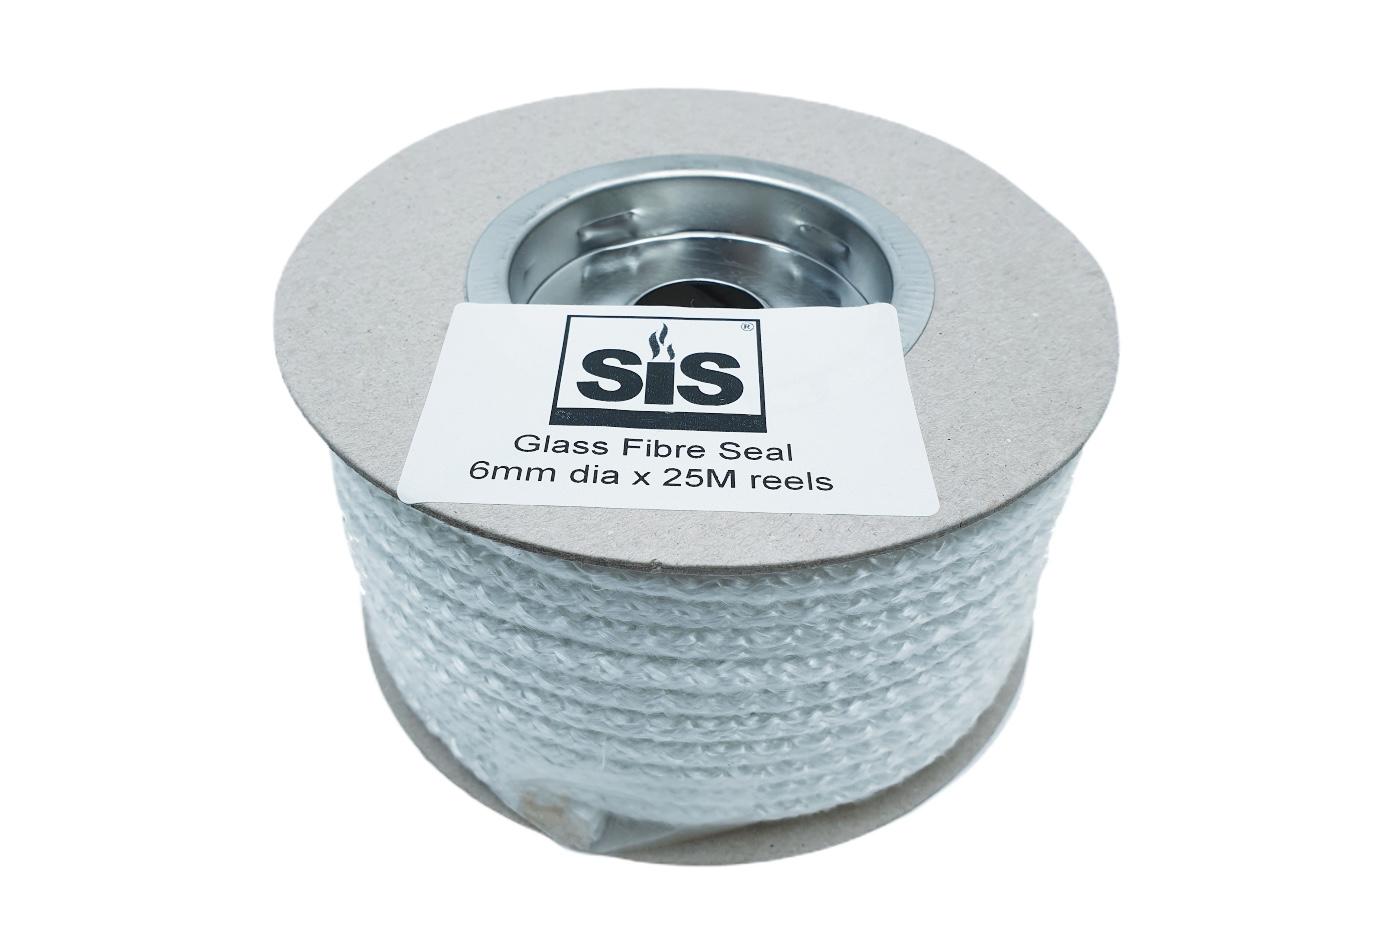 A 25 metre reel of White 6mm standard stove rope - product code R625